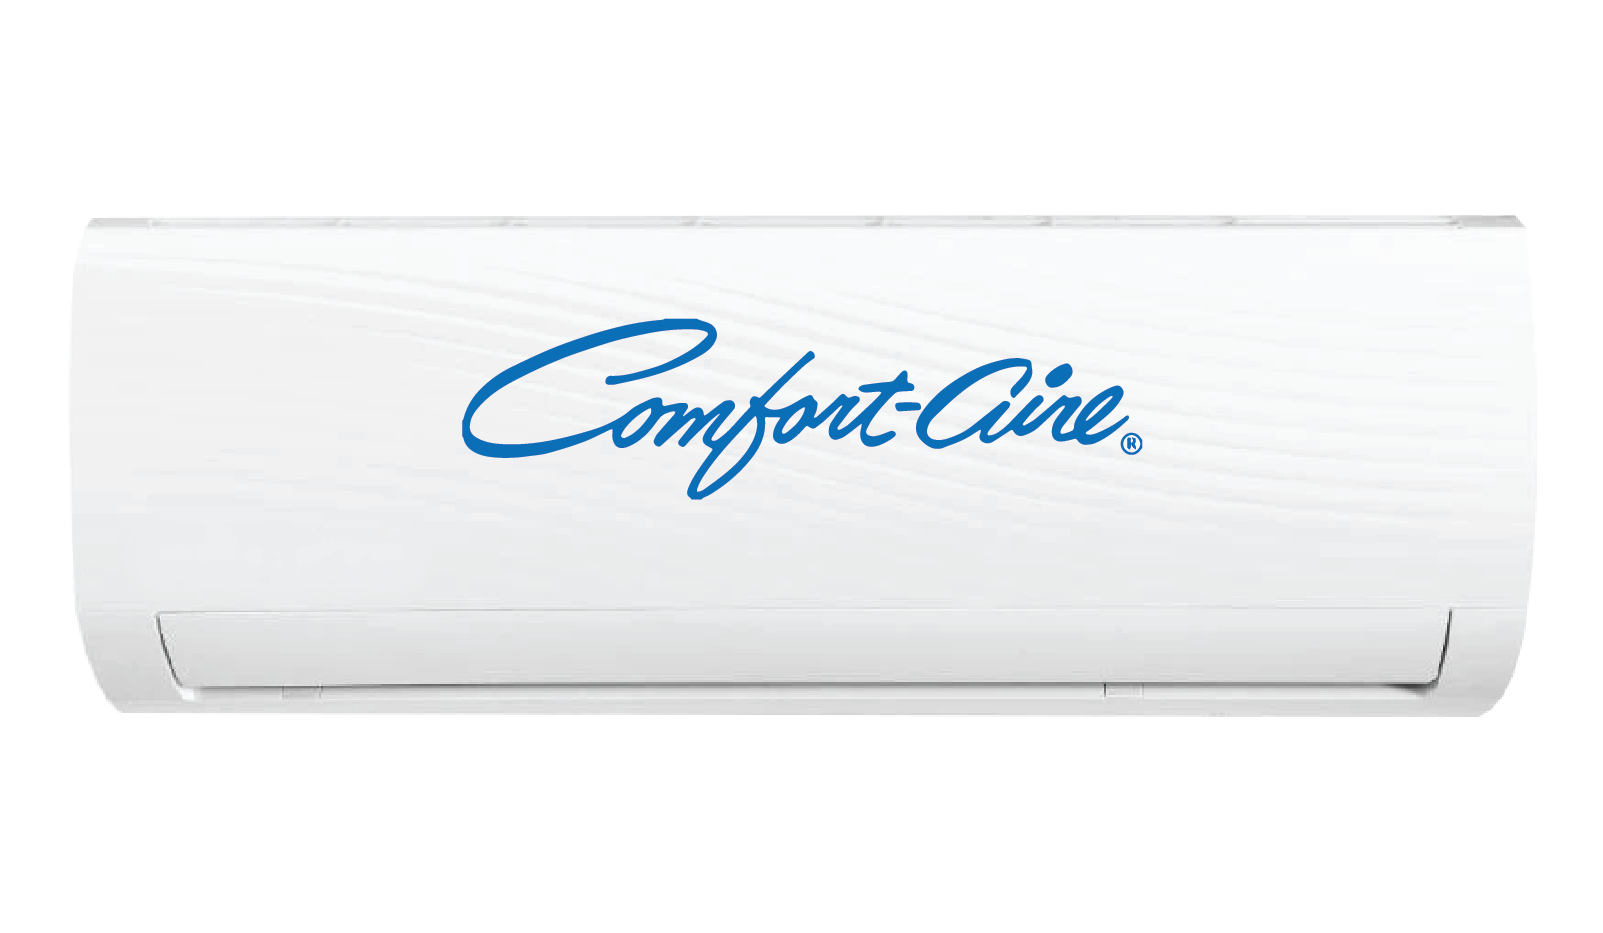 comfort aire - Neil Kool Airconditioning